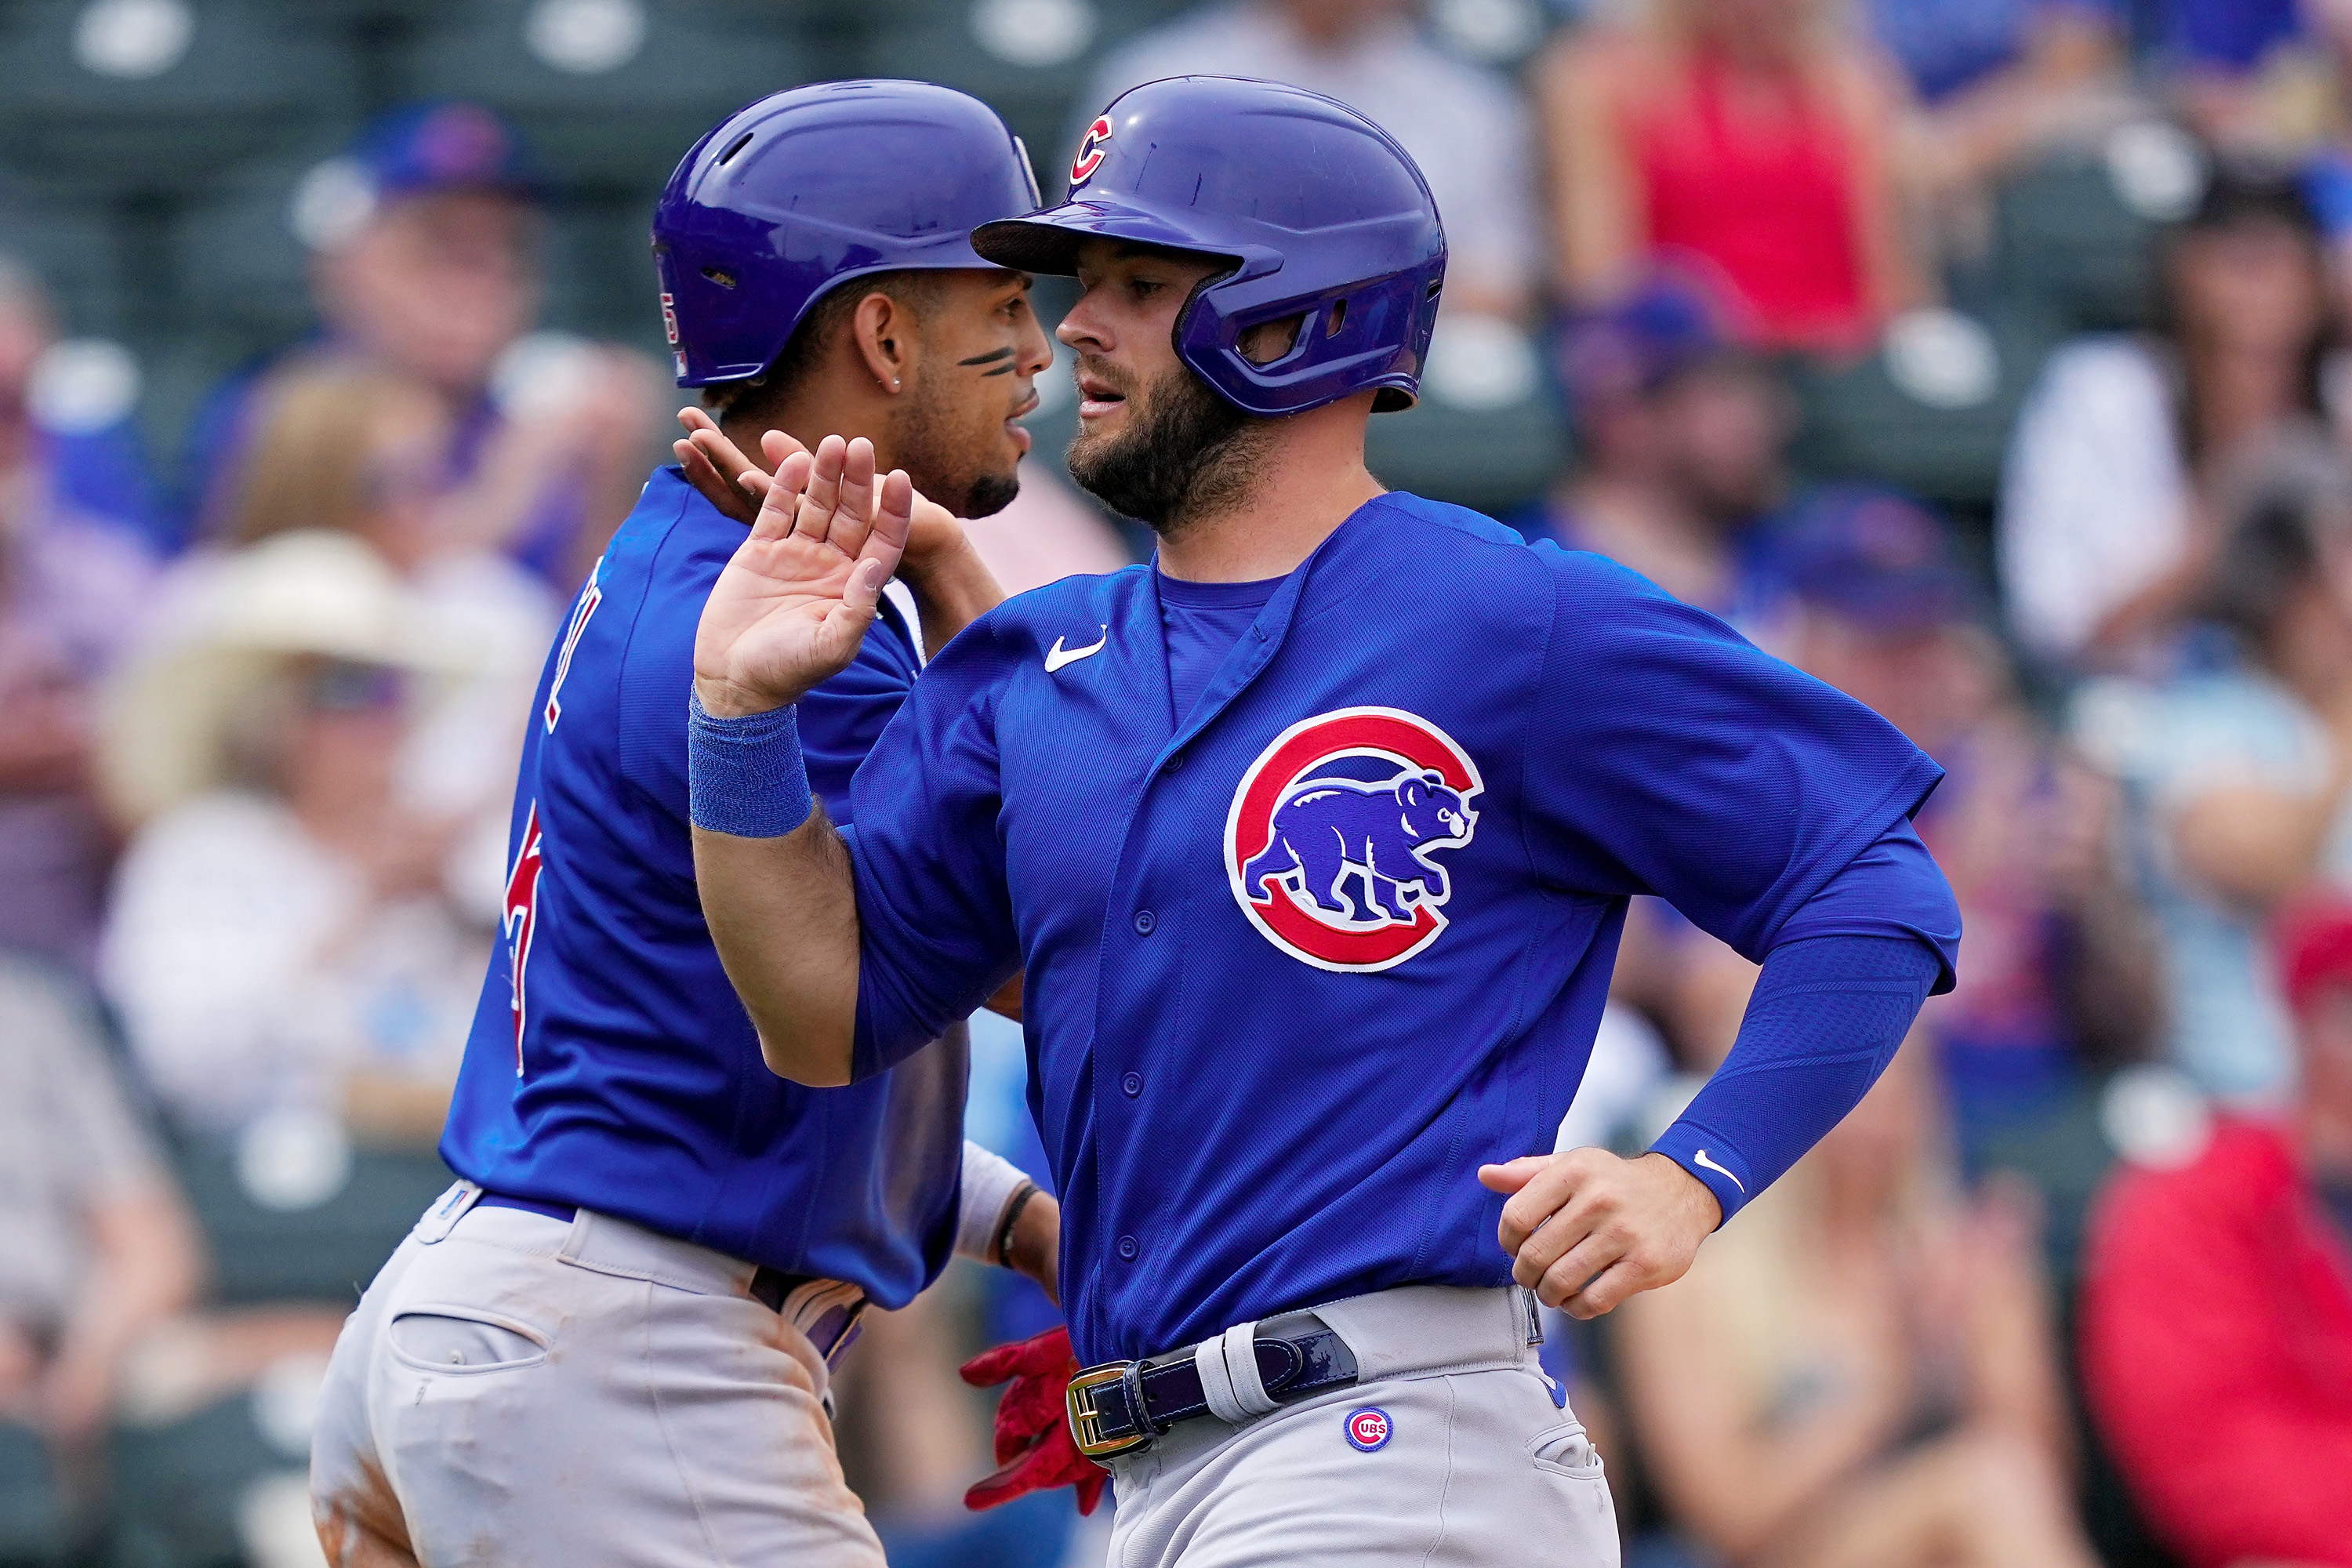 Contreras leads Cardinals past Cubs 3-1 in return to Wrigley